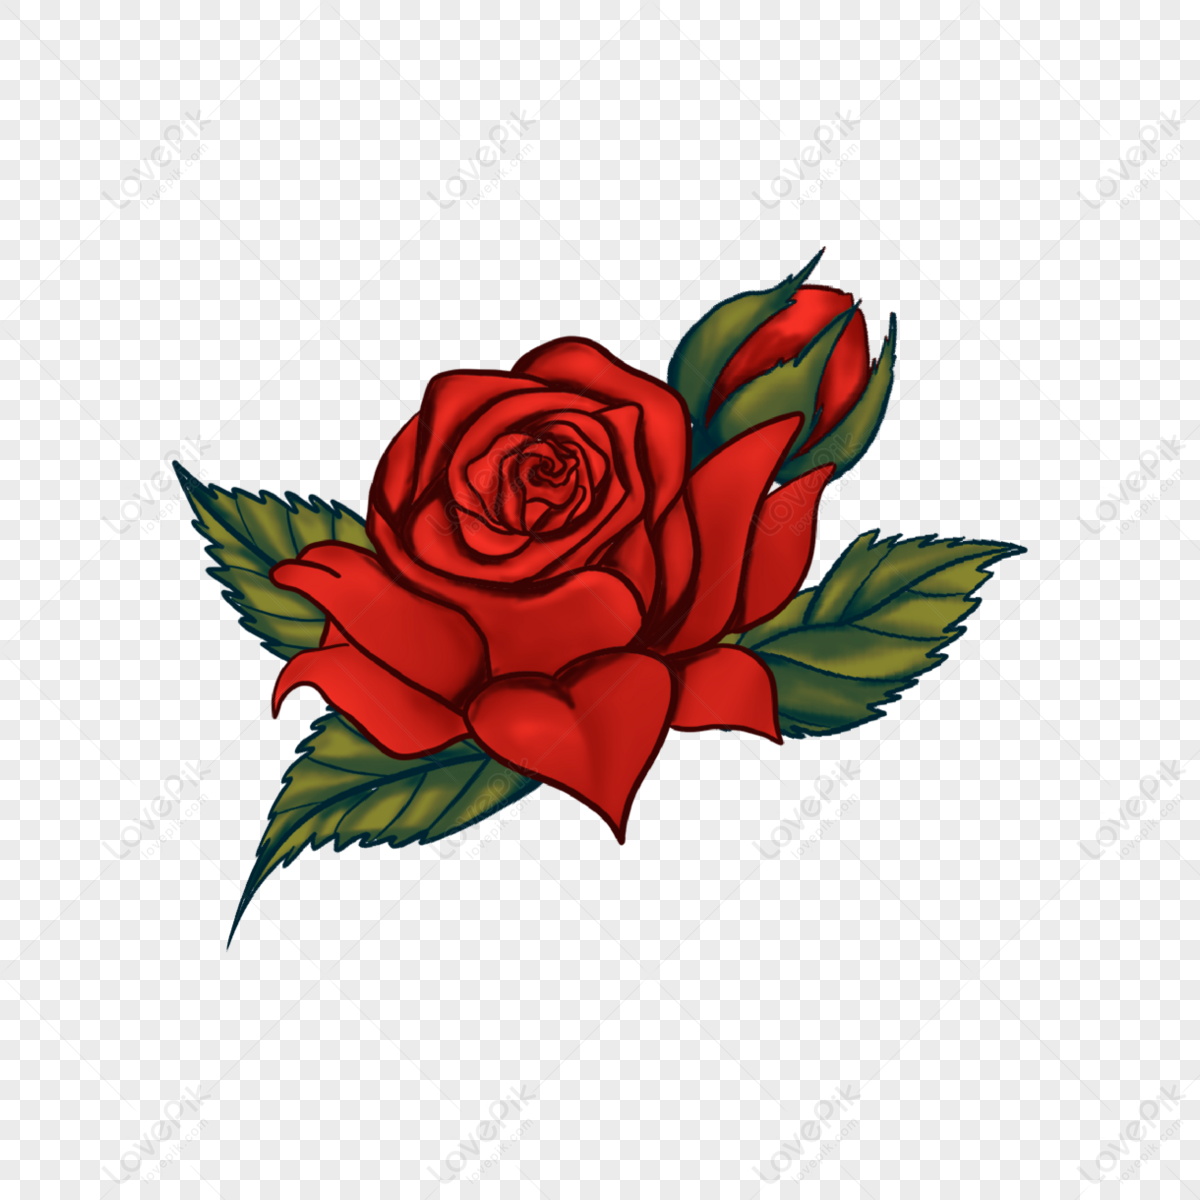 Black rose Drawing Clip art - rose tattoo png download - 2400*2400 - Free Transparent  Rose png Download. - Clip Art Library